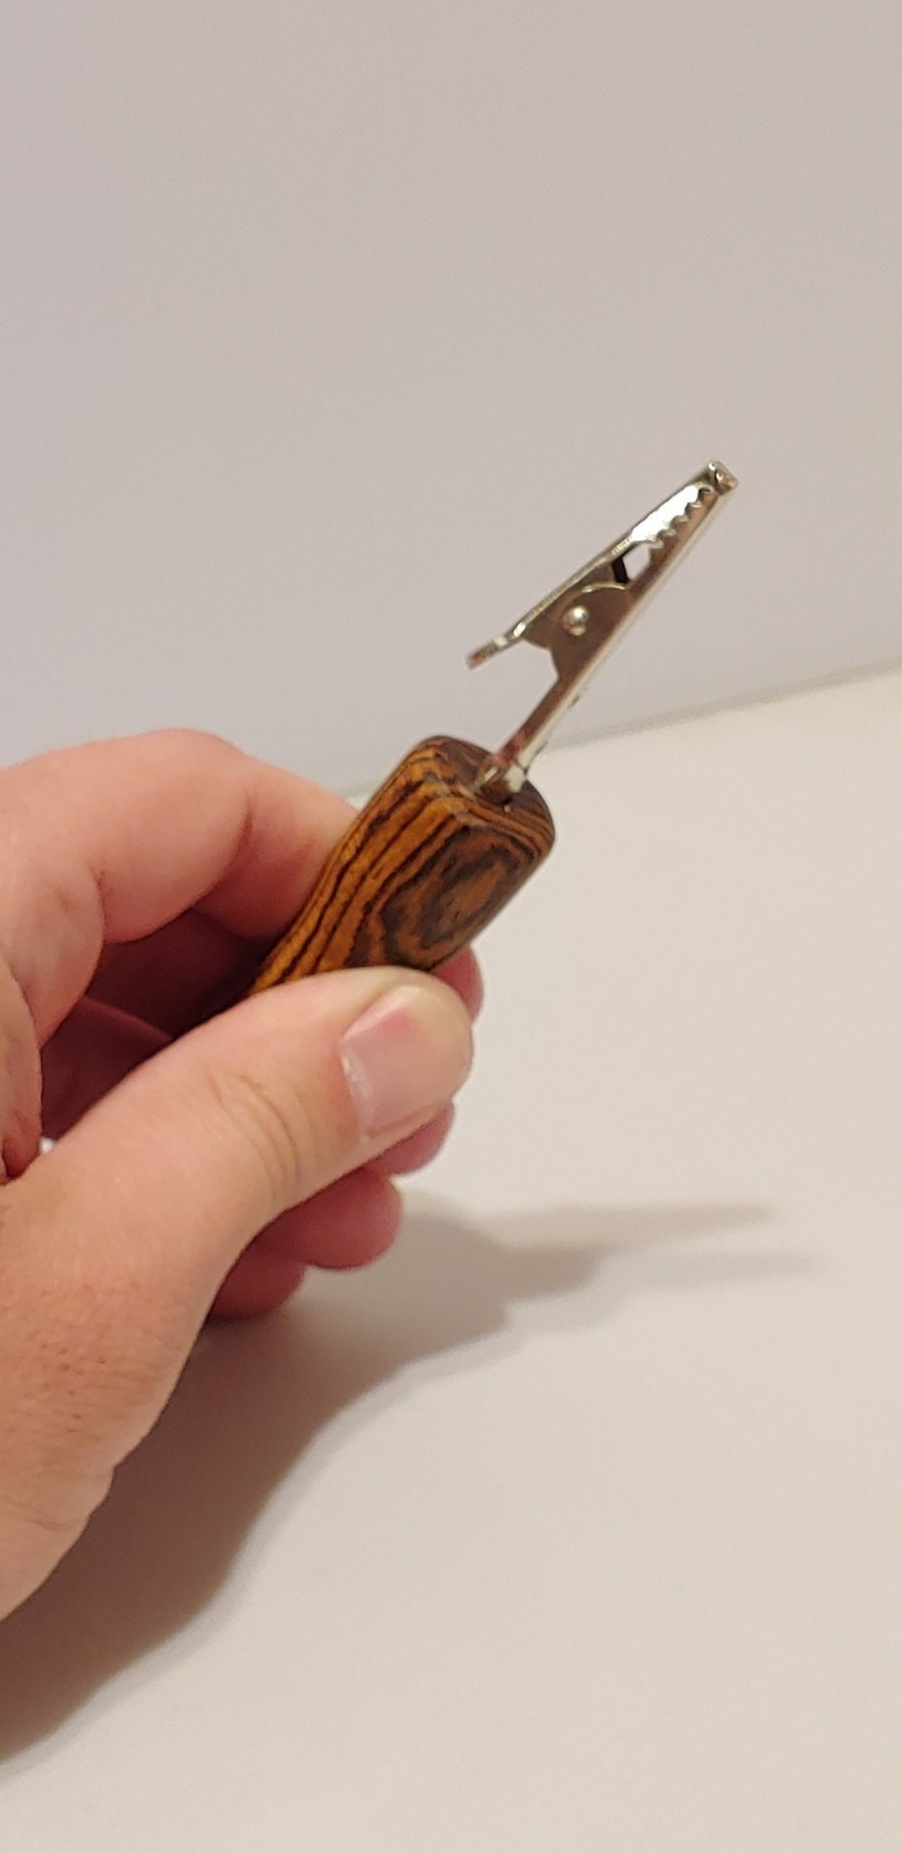 Why You Should Buy a Roach Clip